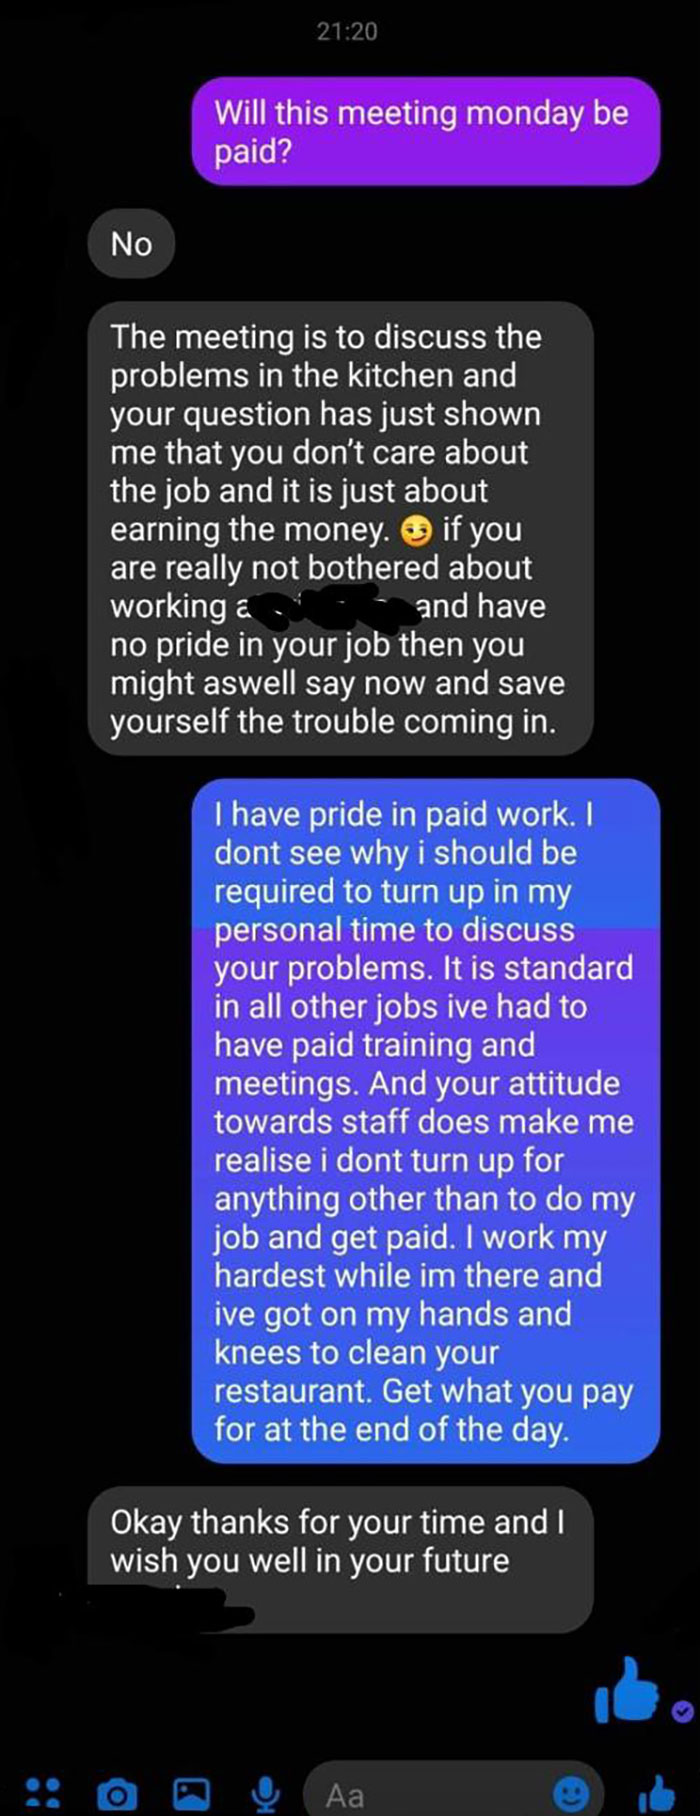 My Partner Asked If They Would Be Getting Paid For A Mandatory Work Meeting On Their Day Off